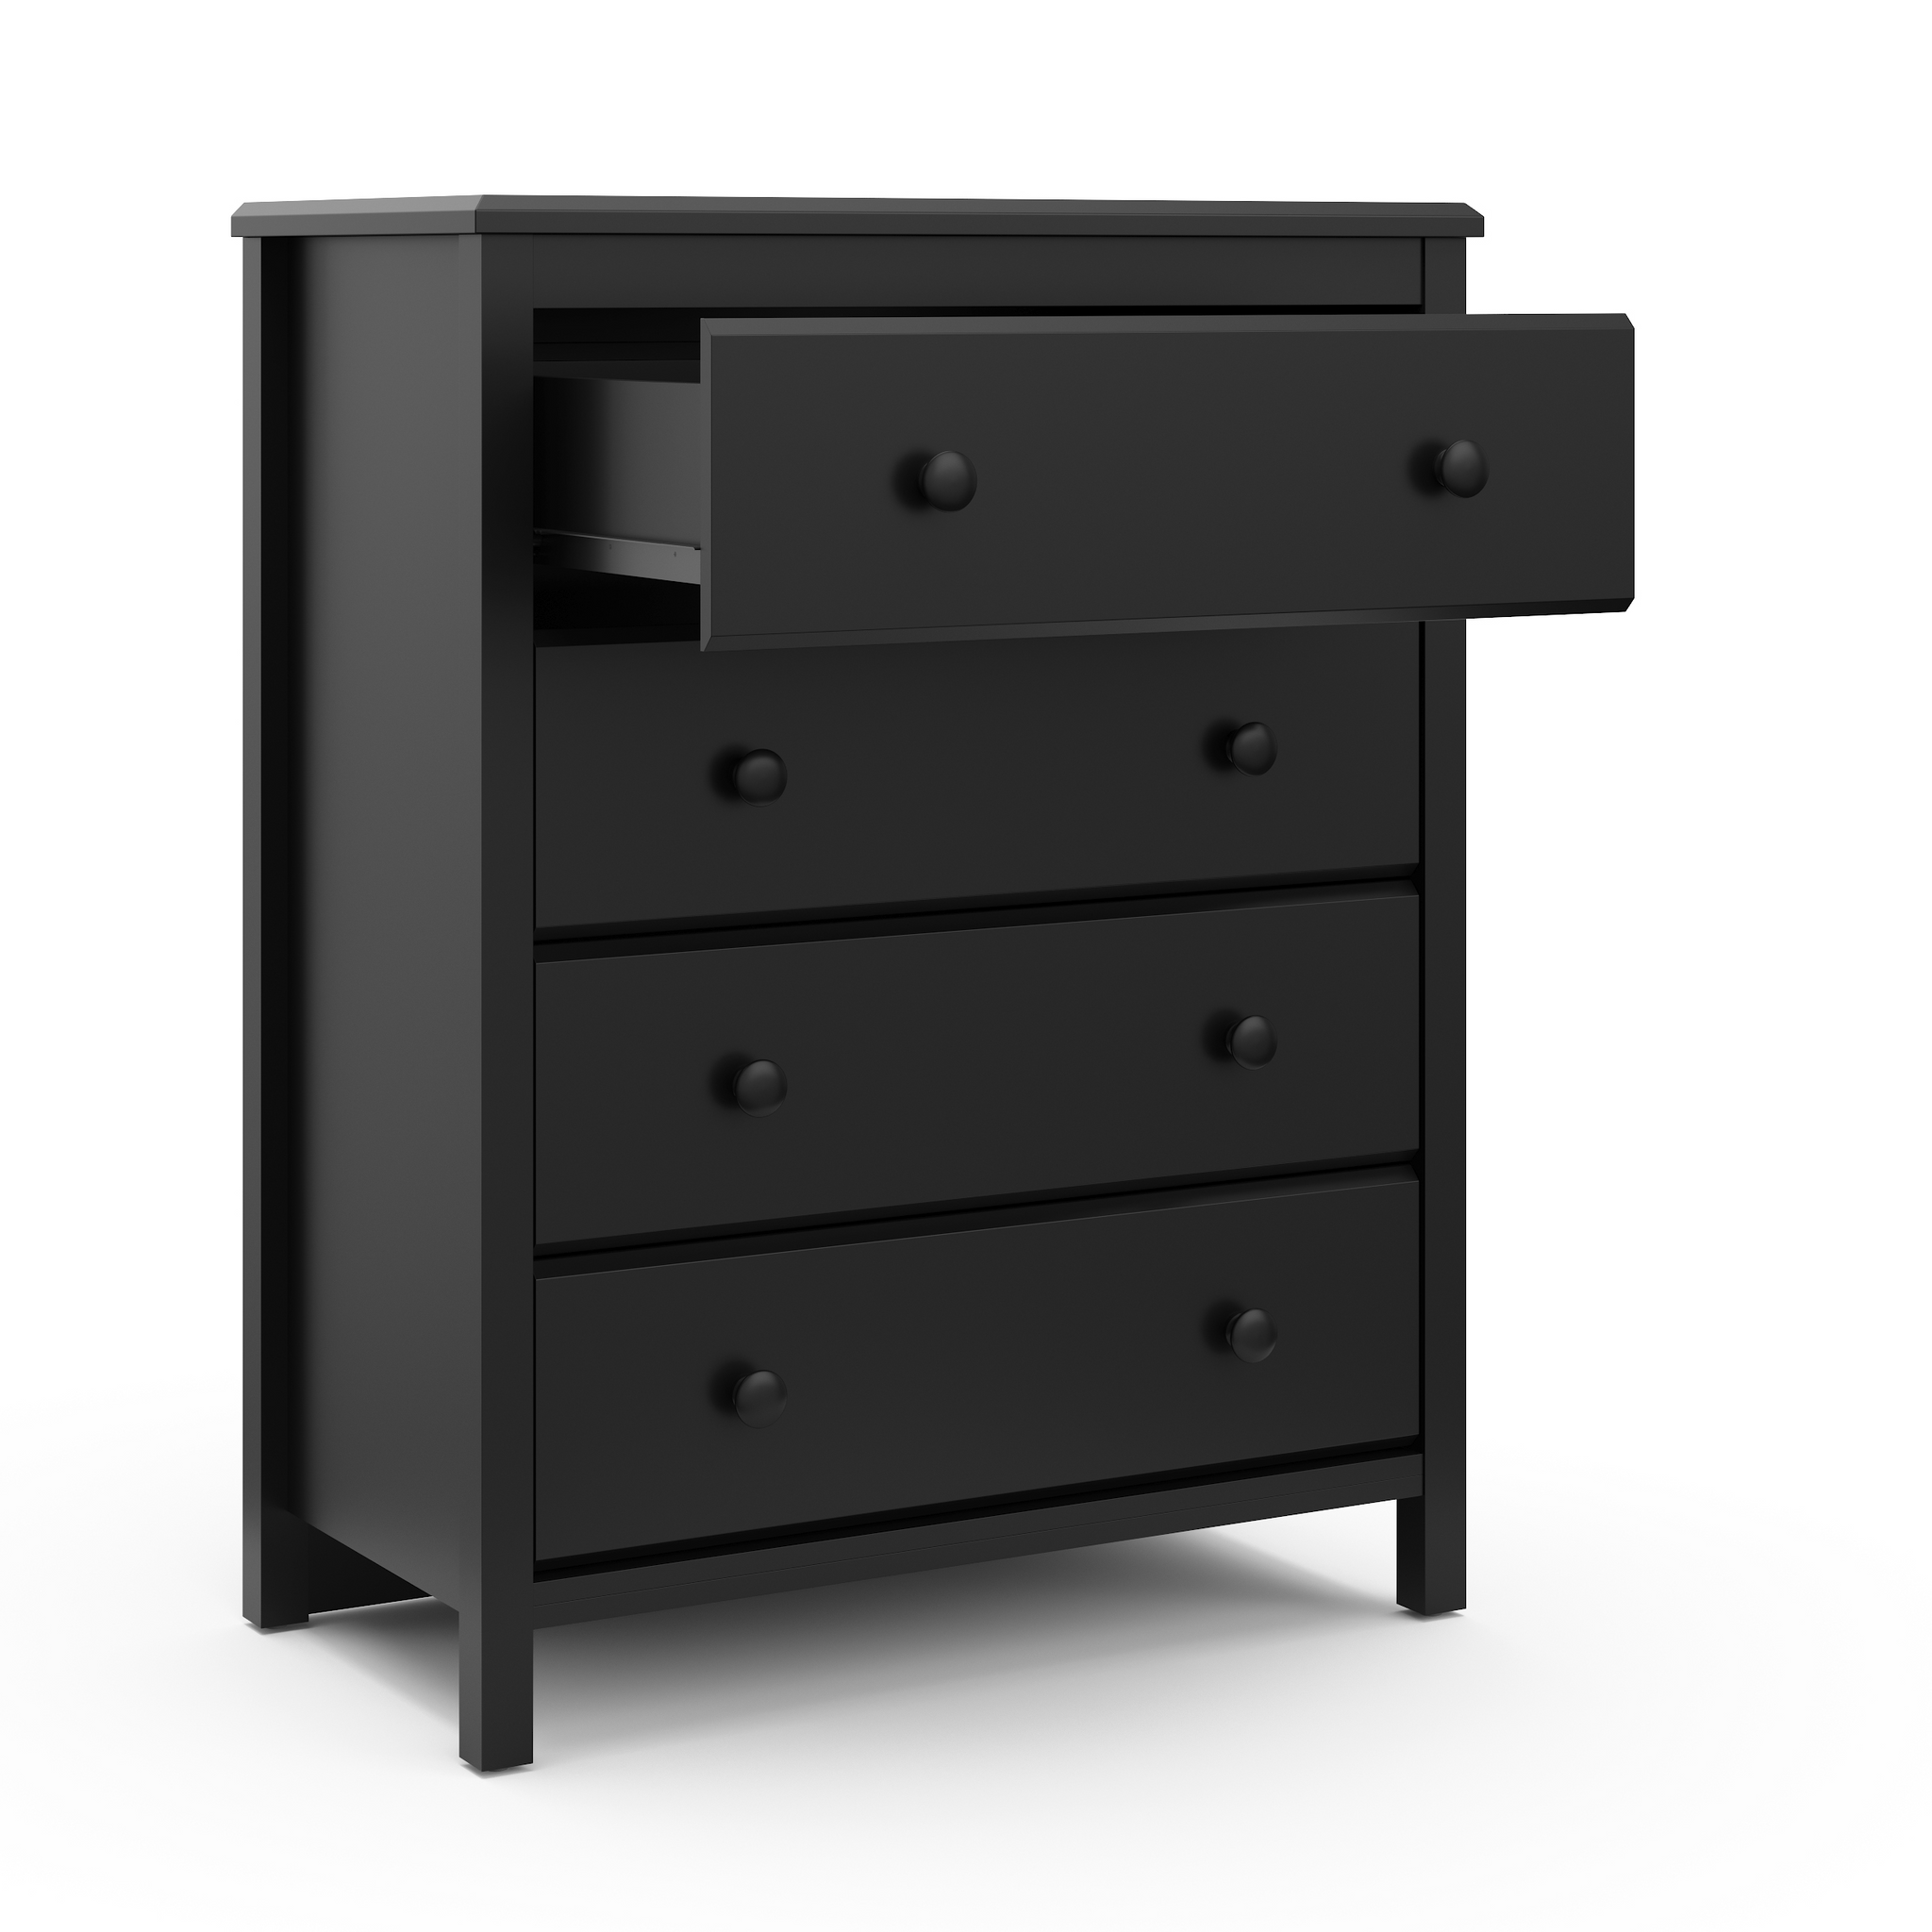 black 4 drawer chest with open drawer